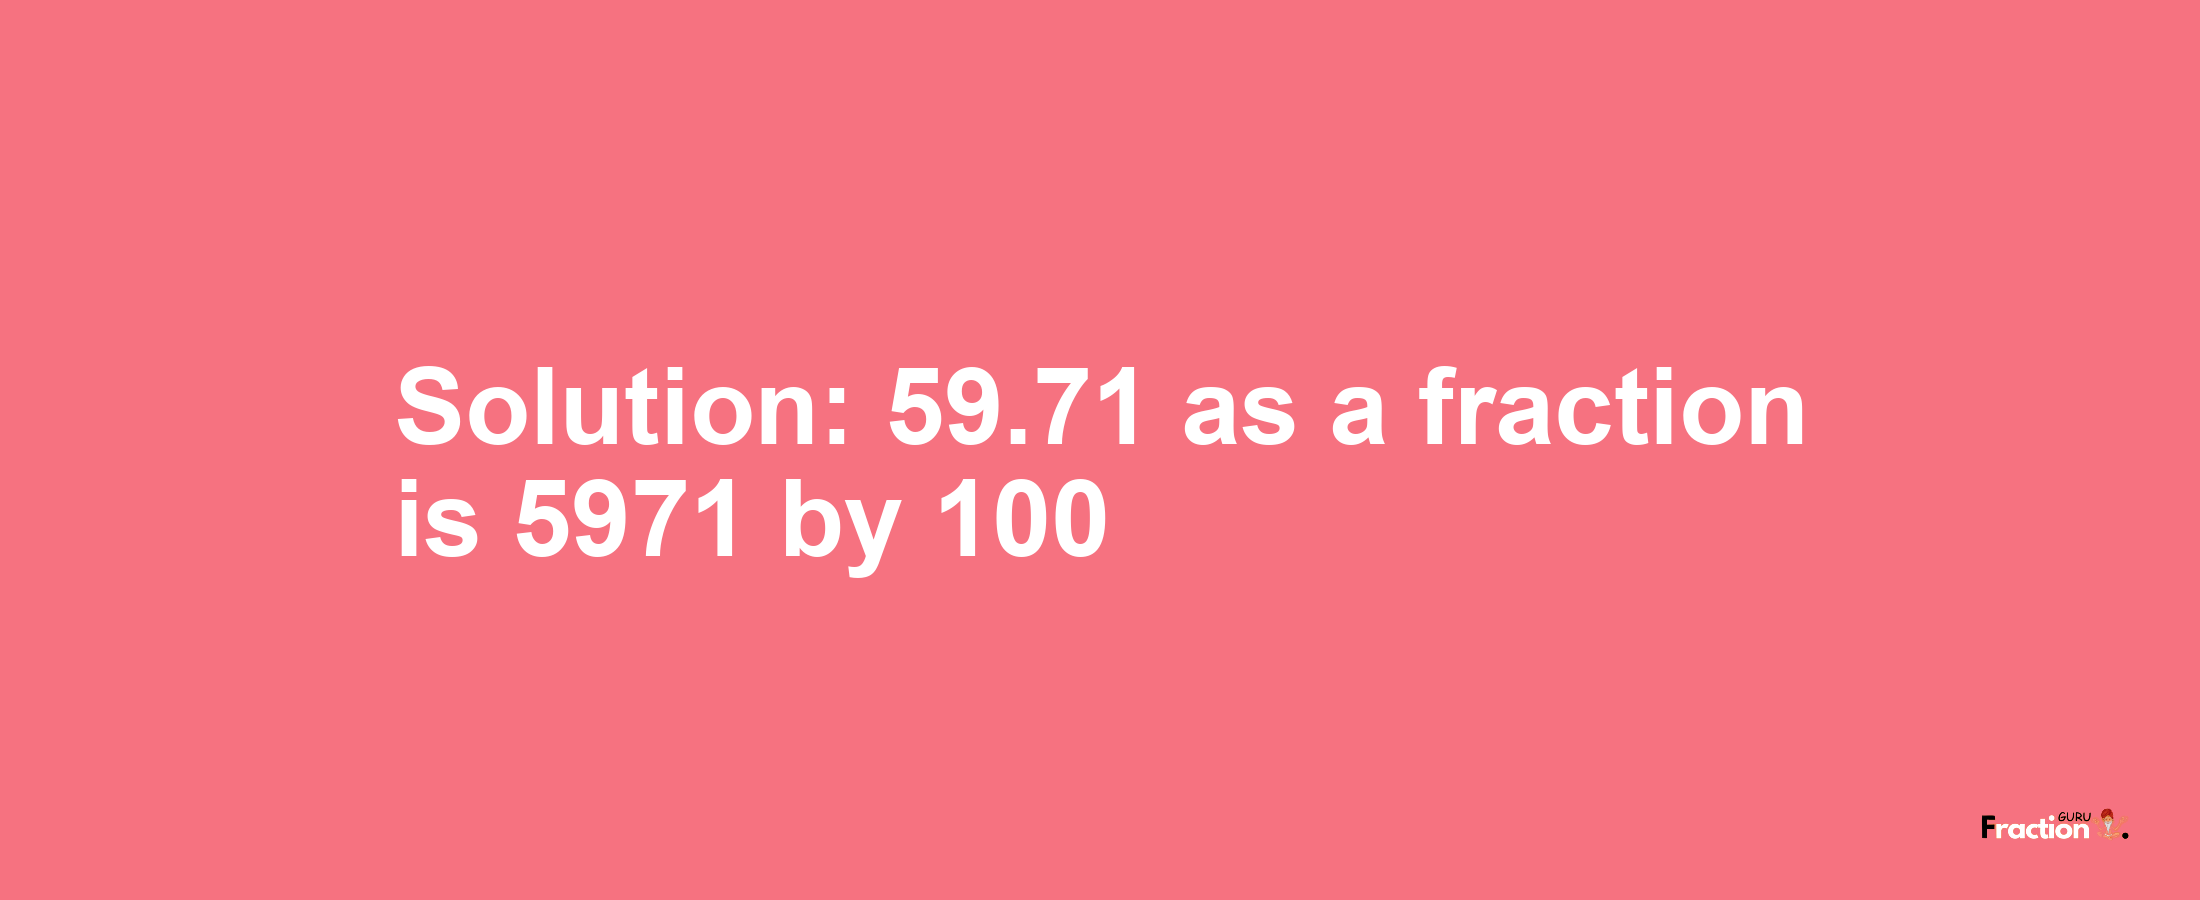 Solution:59.71 as a fraction is 5971/100